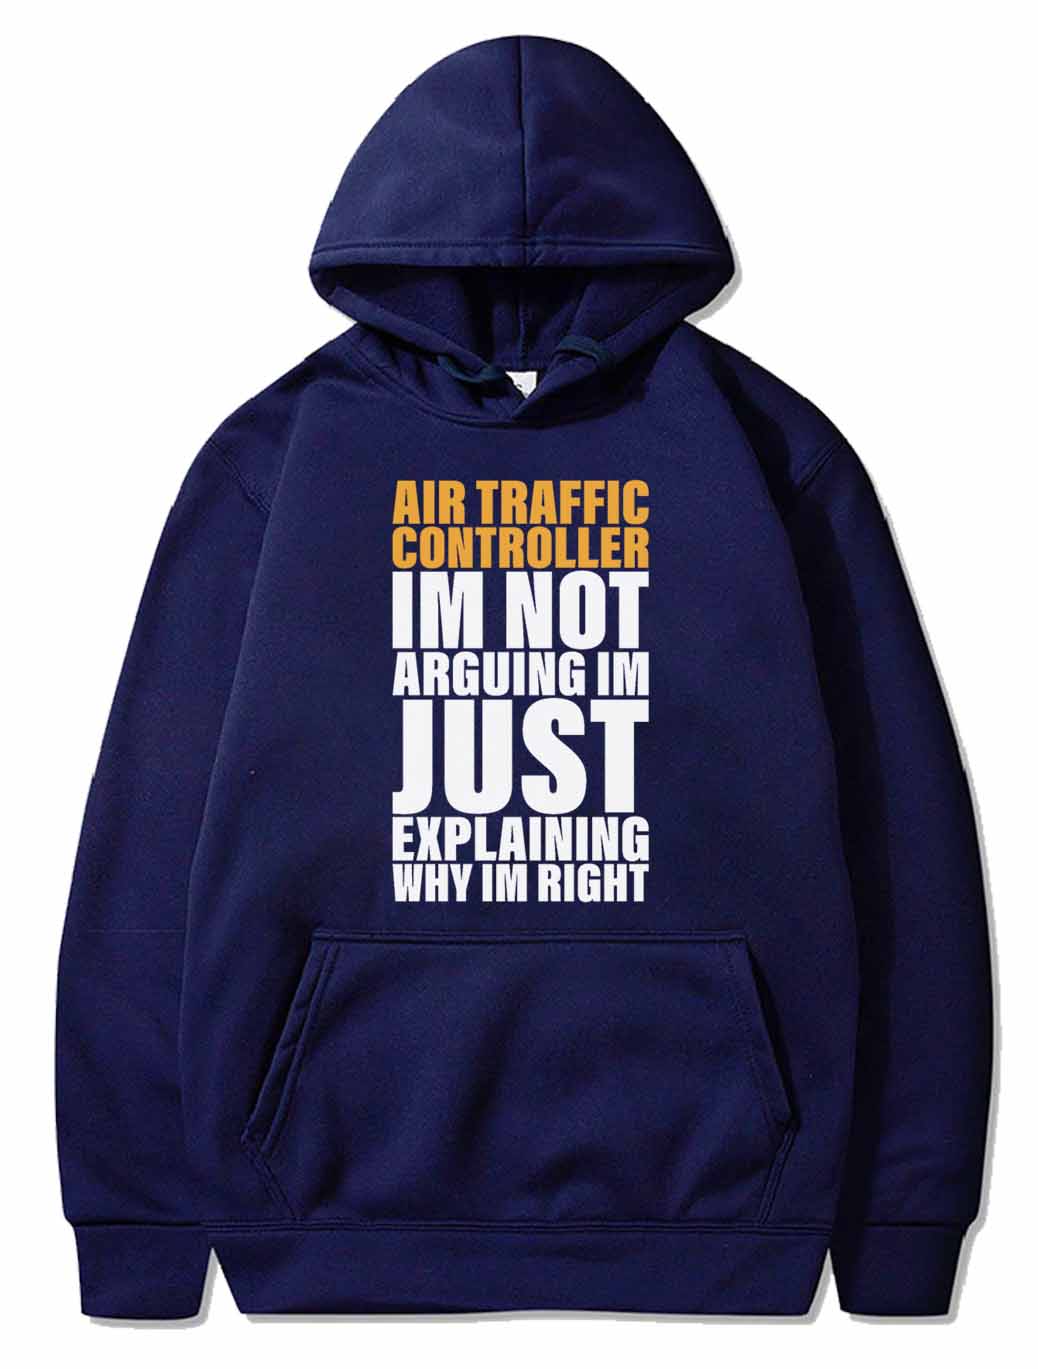 Air Traffic Controller Are Always Right for ATC PULLOVER THE AV8R